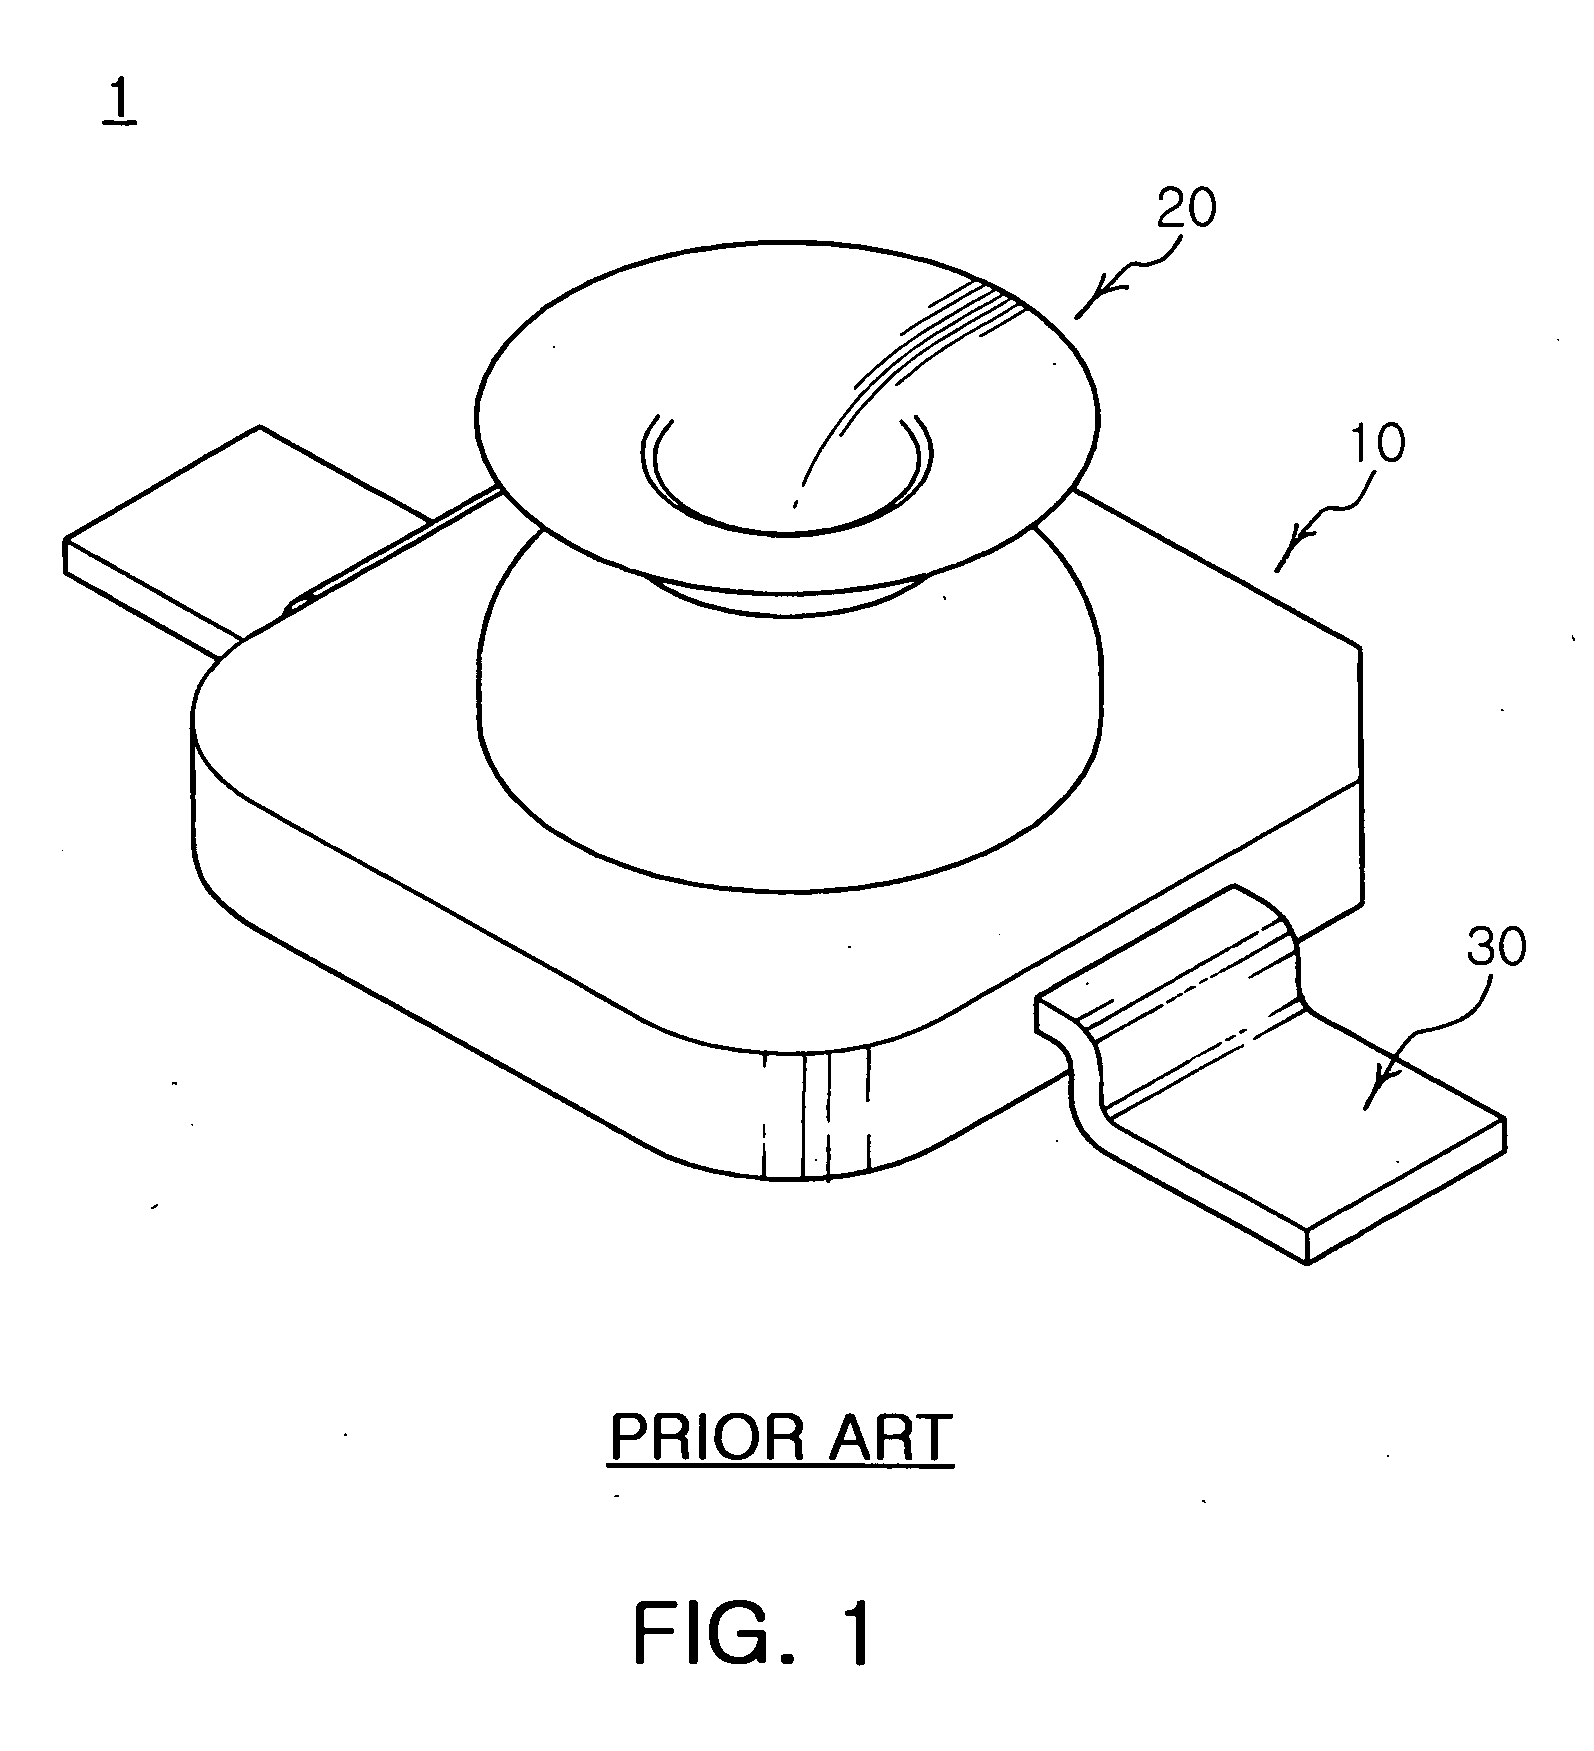 LED having improved soldering structure, method for soldering the LED to PCB, and LED assembly manufactured by the method